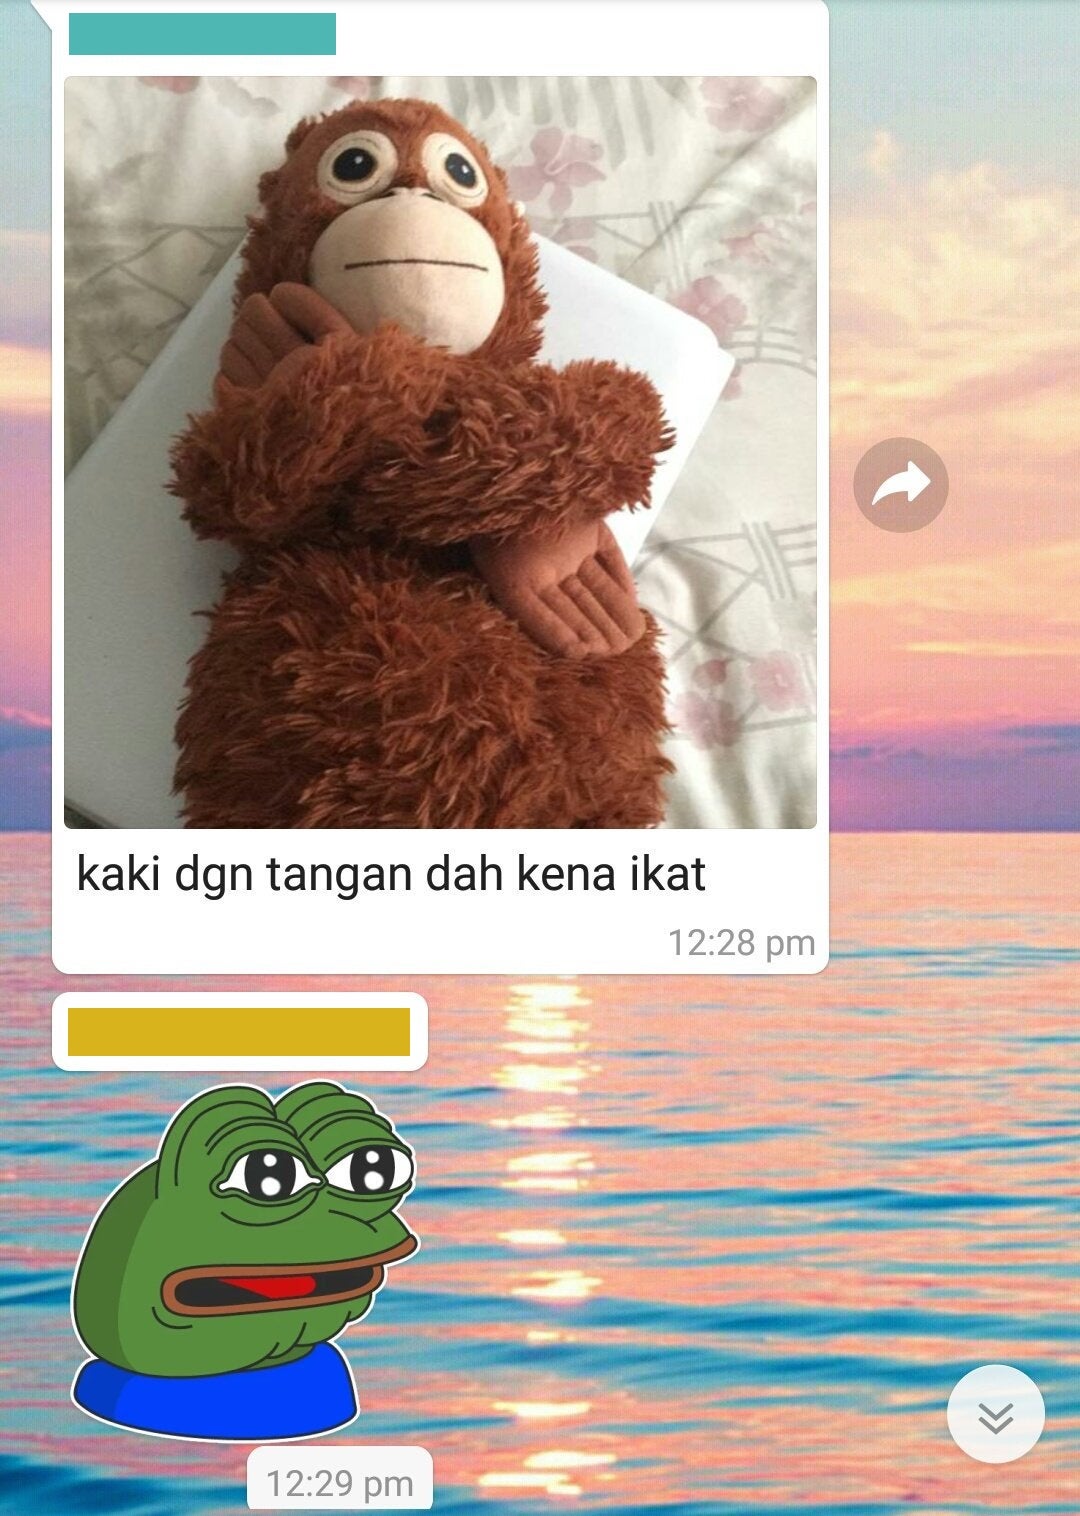 M'sian Woman's Screenshots Shows Hilarious Play-by-Play "Kid"napping - WORLD OF BUZZ 2